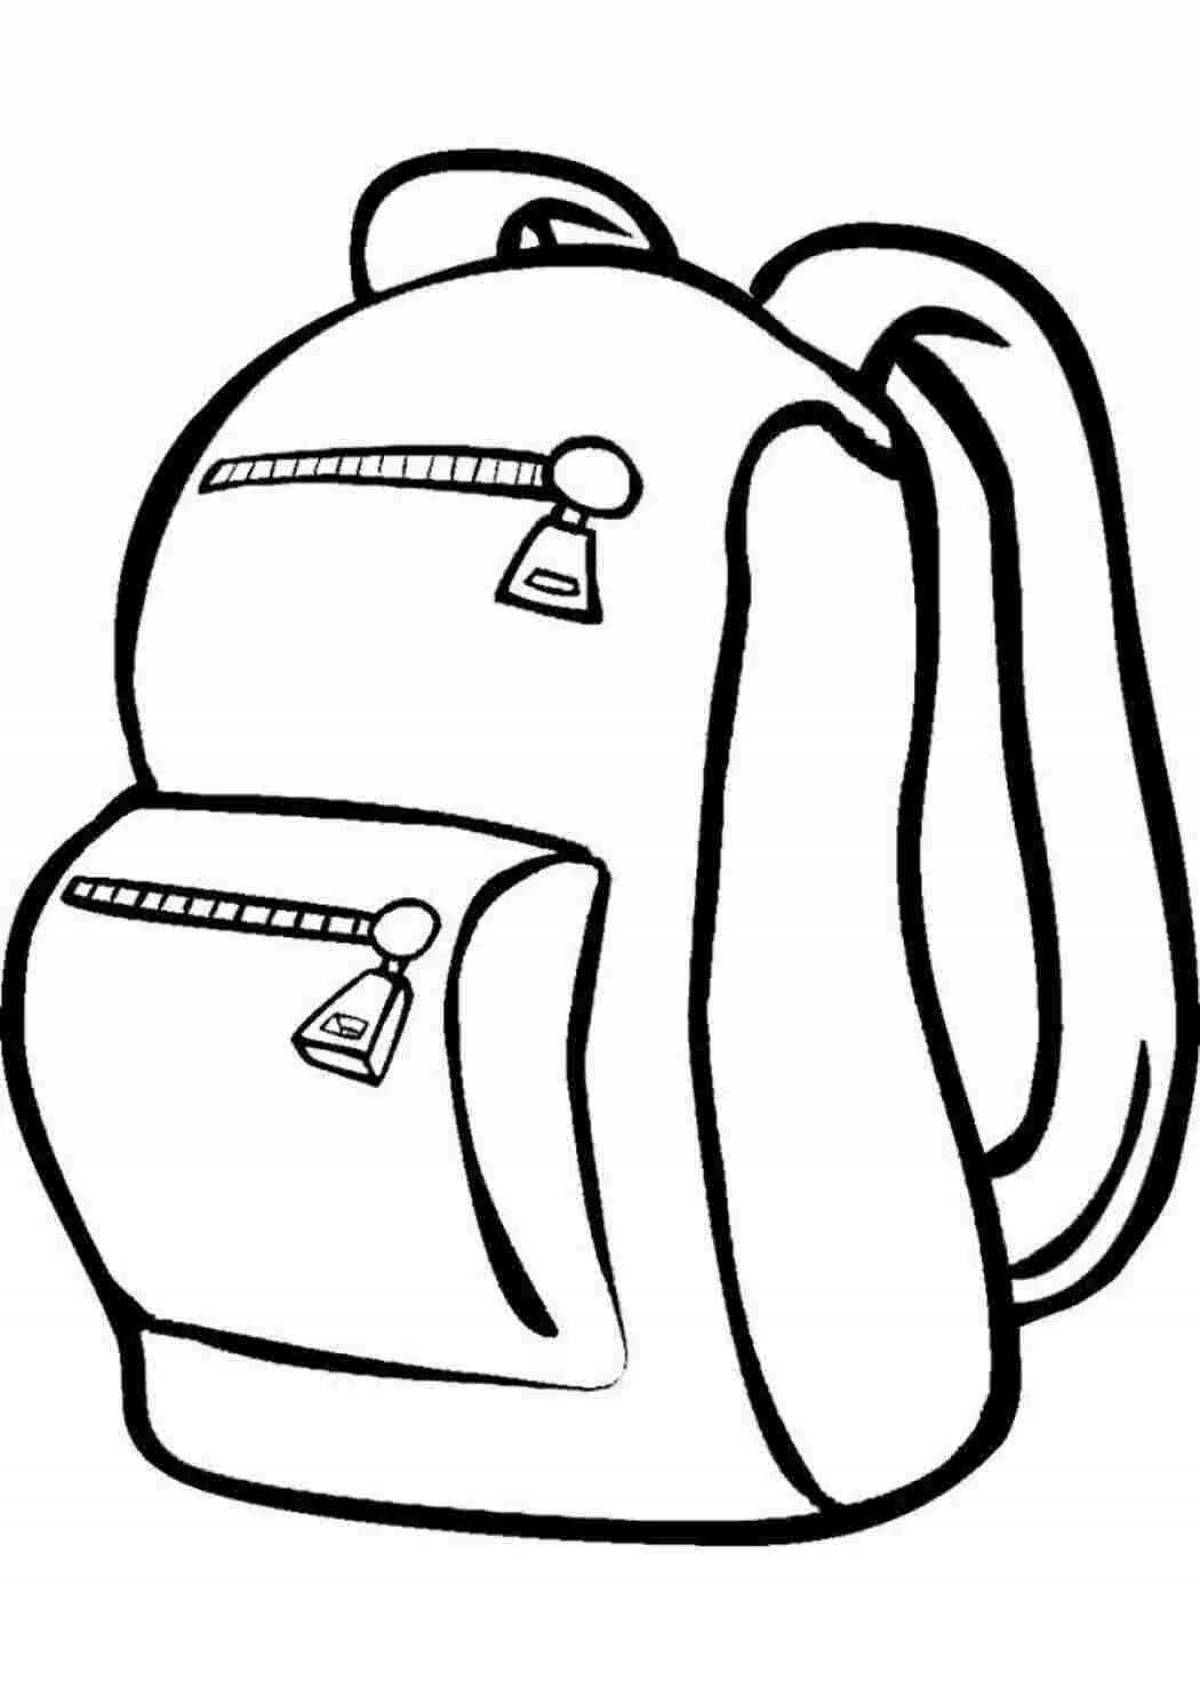 Adorable backpack coloring page